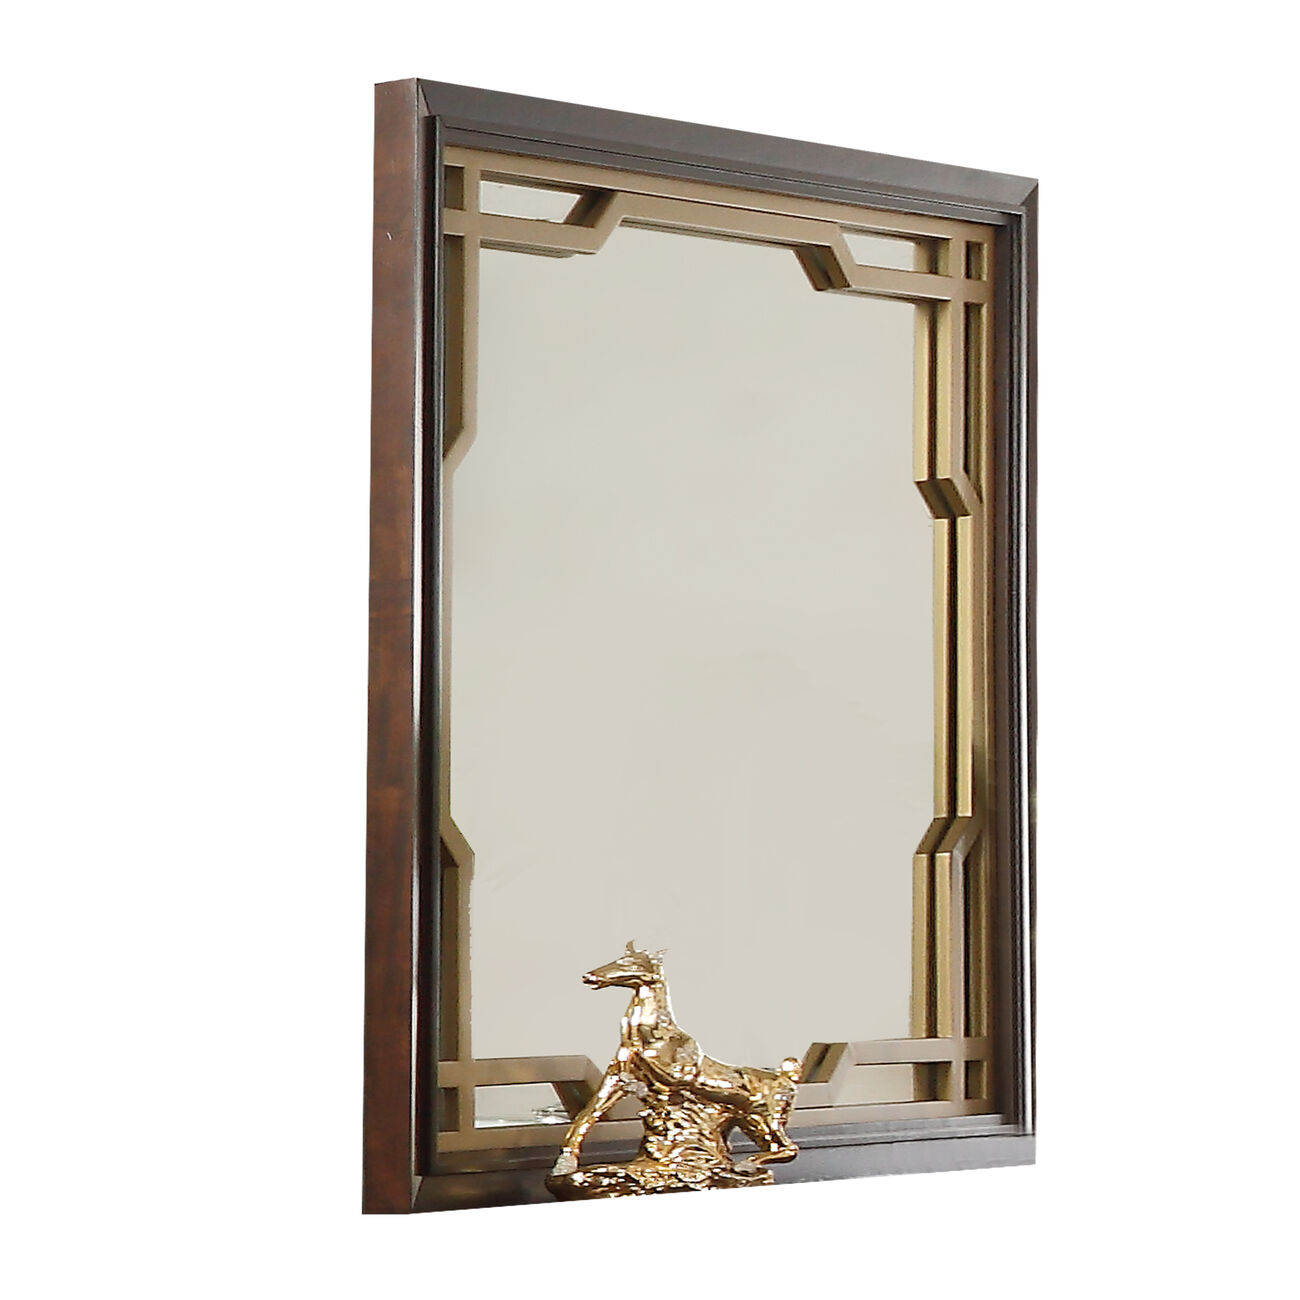 Rectangular Wooden Mirror with Metal Cutout Pattern, Brown and Gold